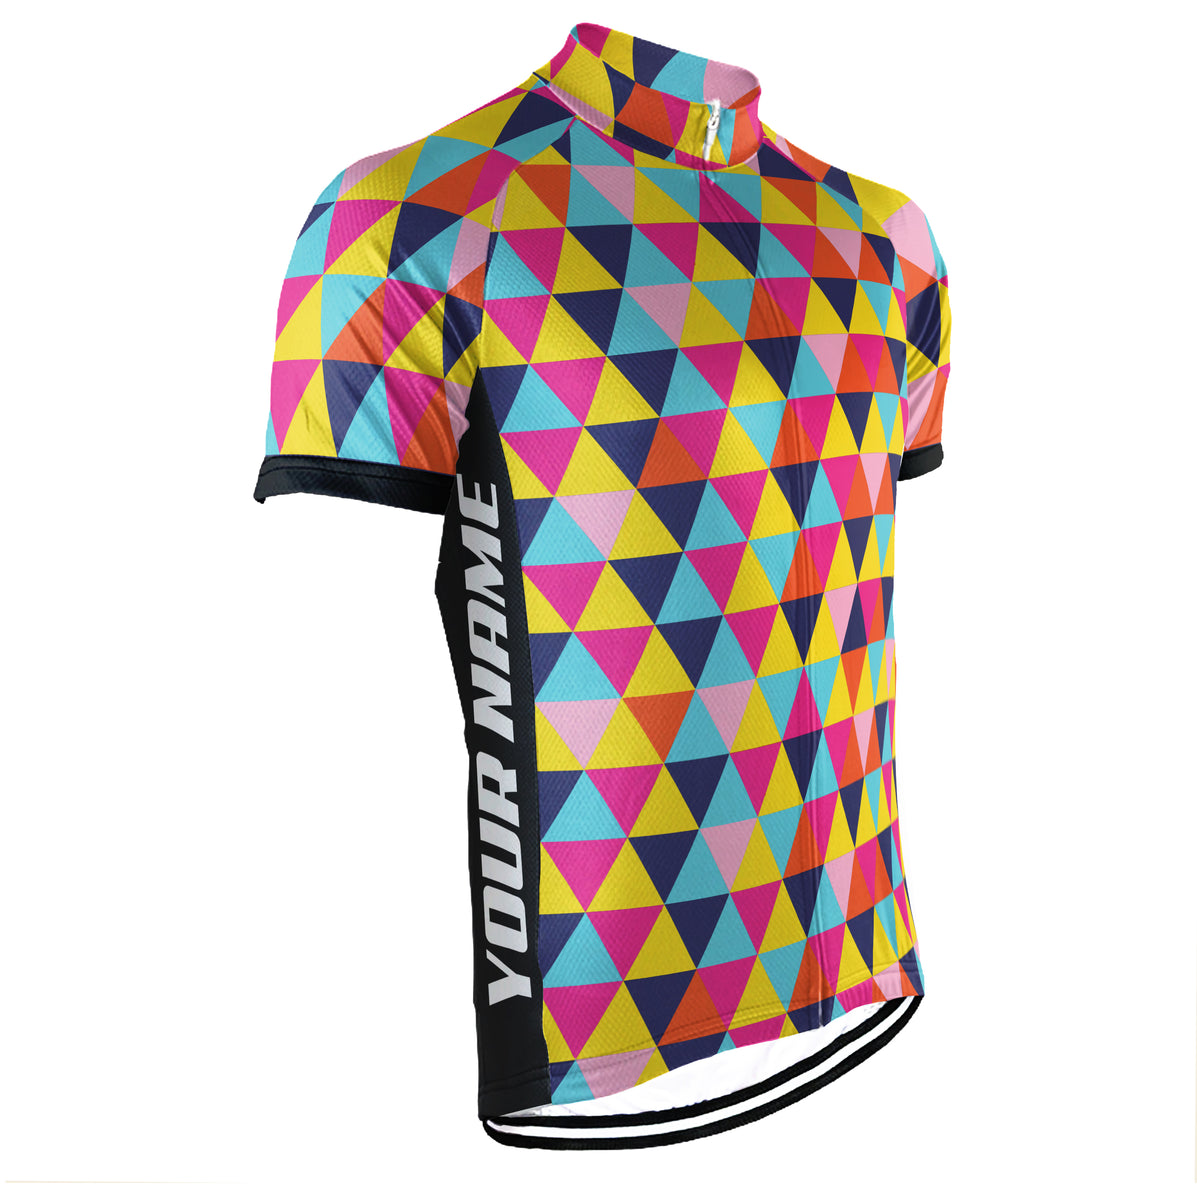  Men's Cycling Jersey Short Sleeve Bike Clothing Multicolored  Diamond Size M : Clothing, Shoes & Jewelry